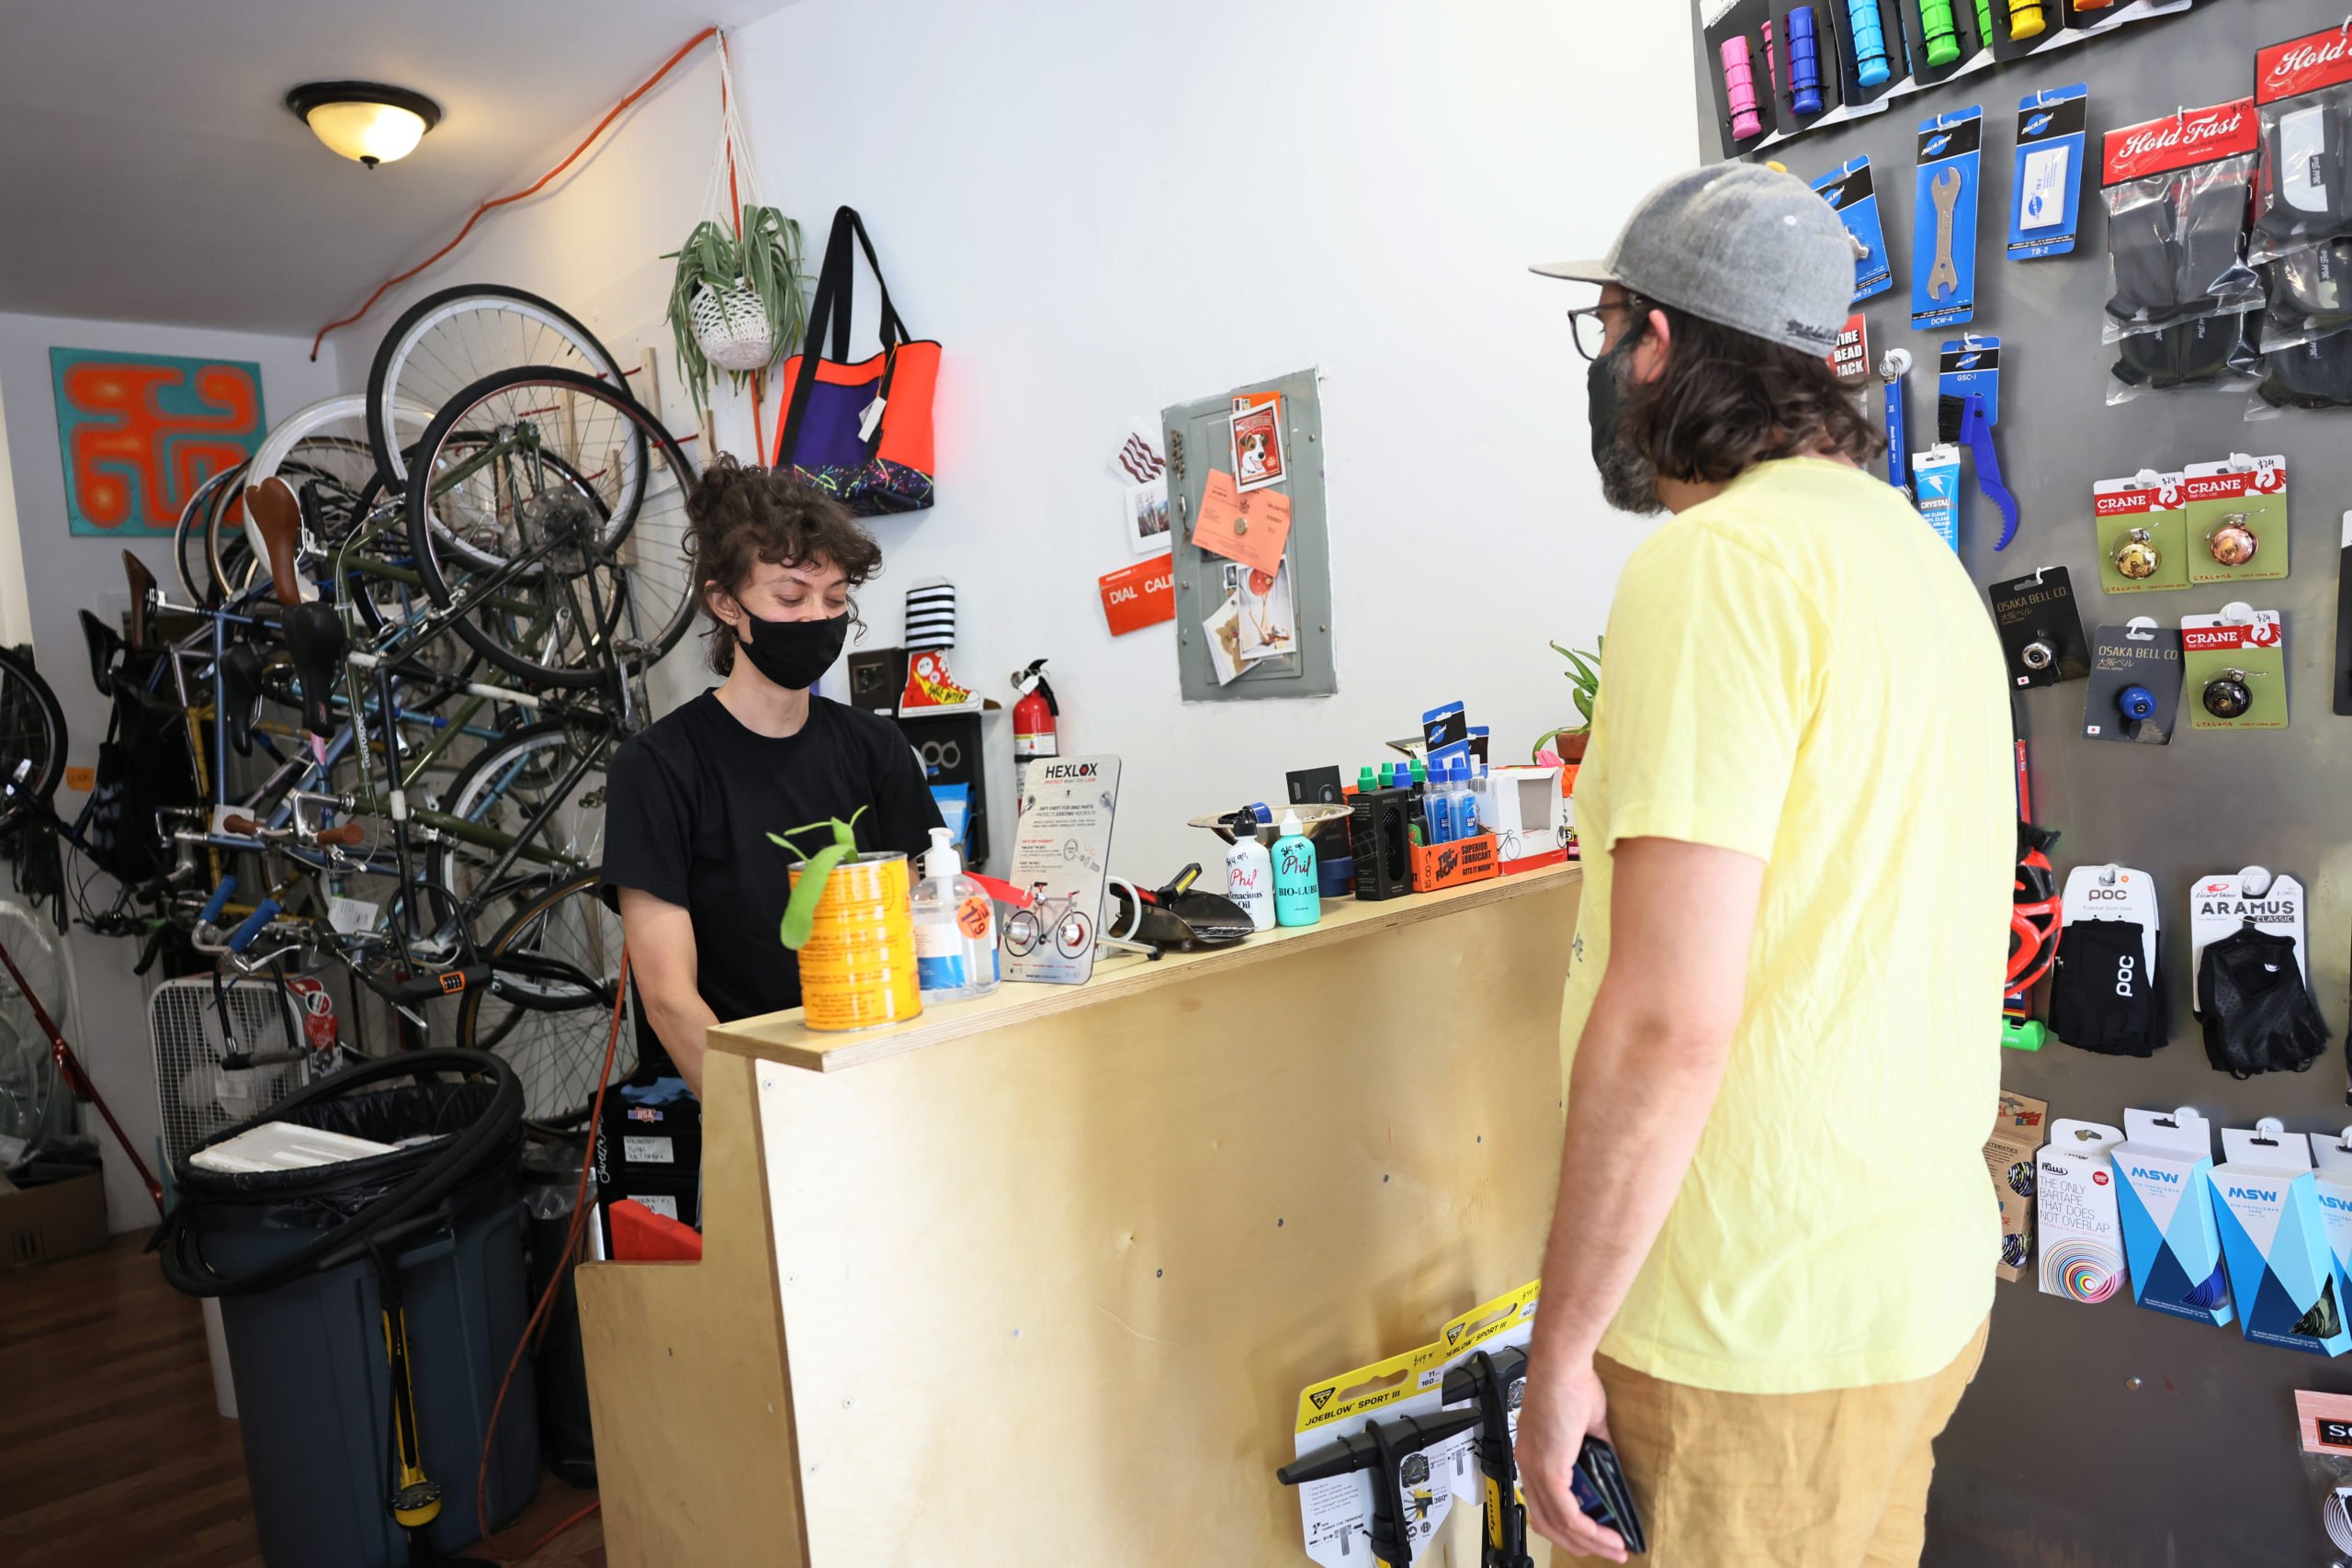 A customer shops for a bike on June 7 in New York City. (Michael M. Santiago/Getty Images)